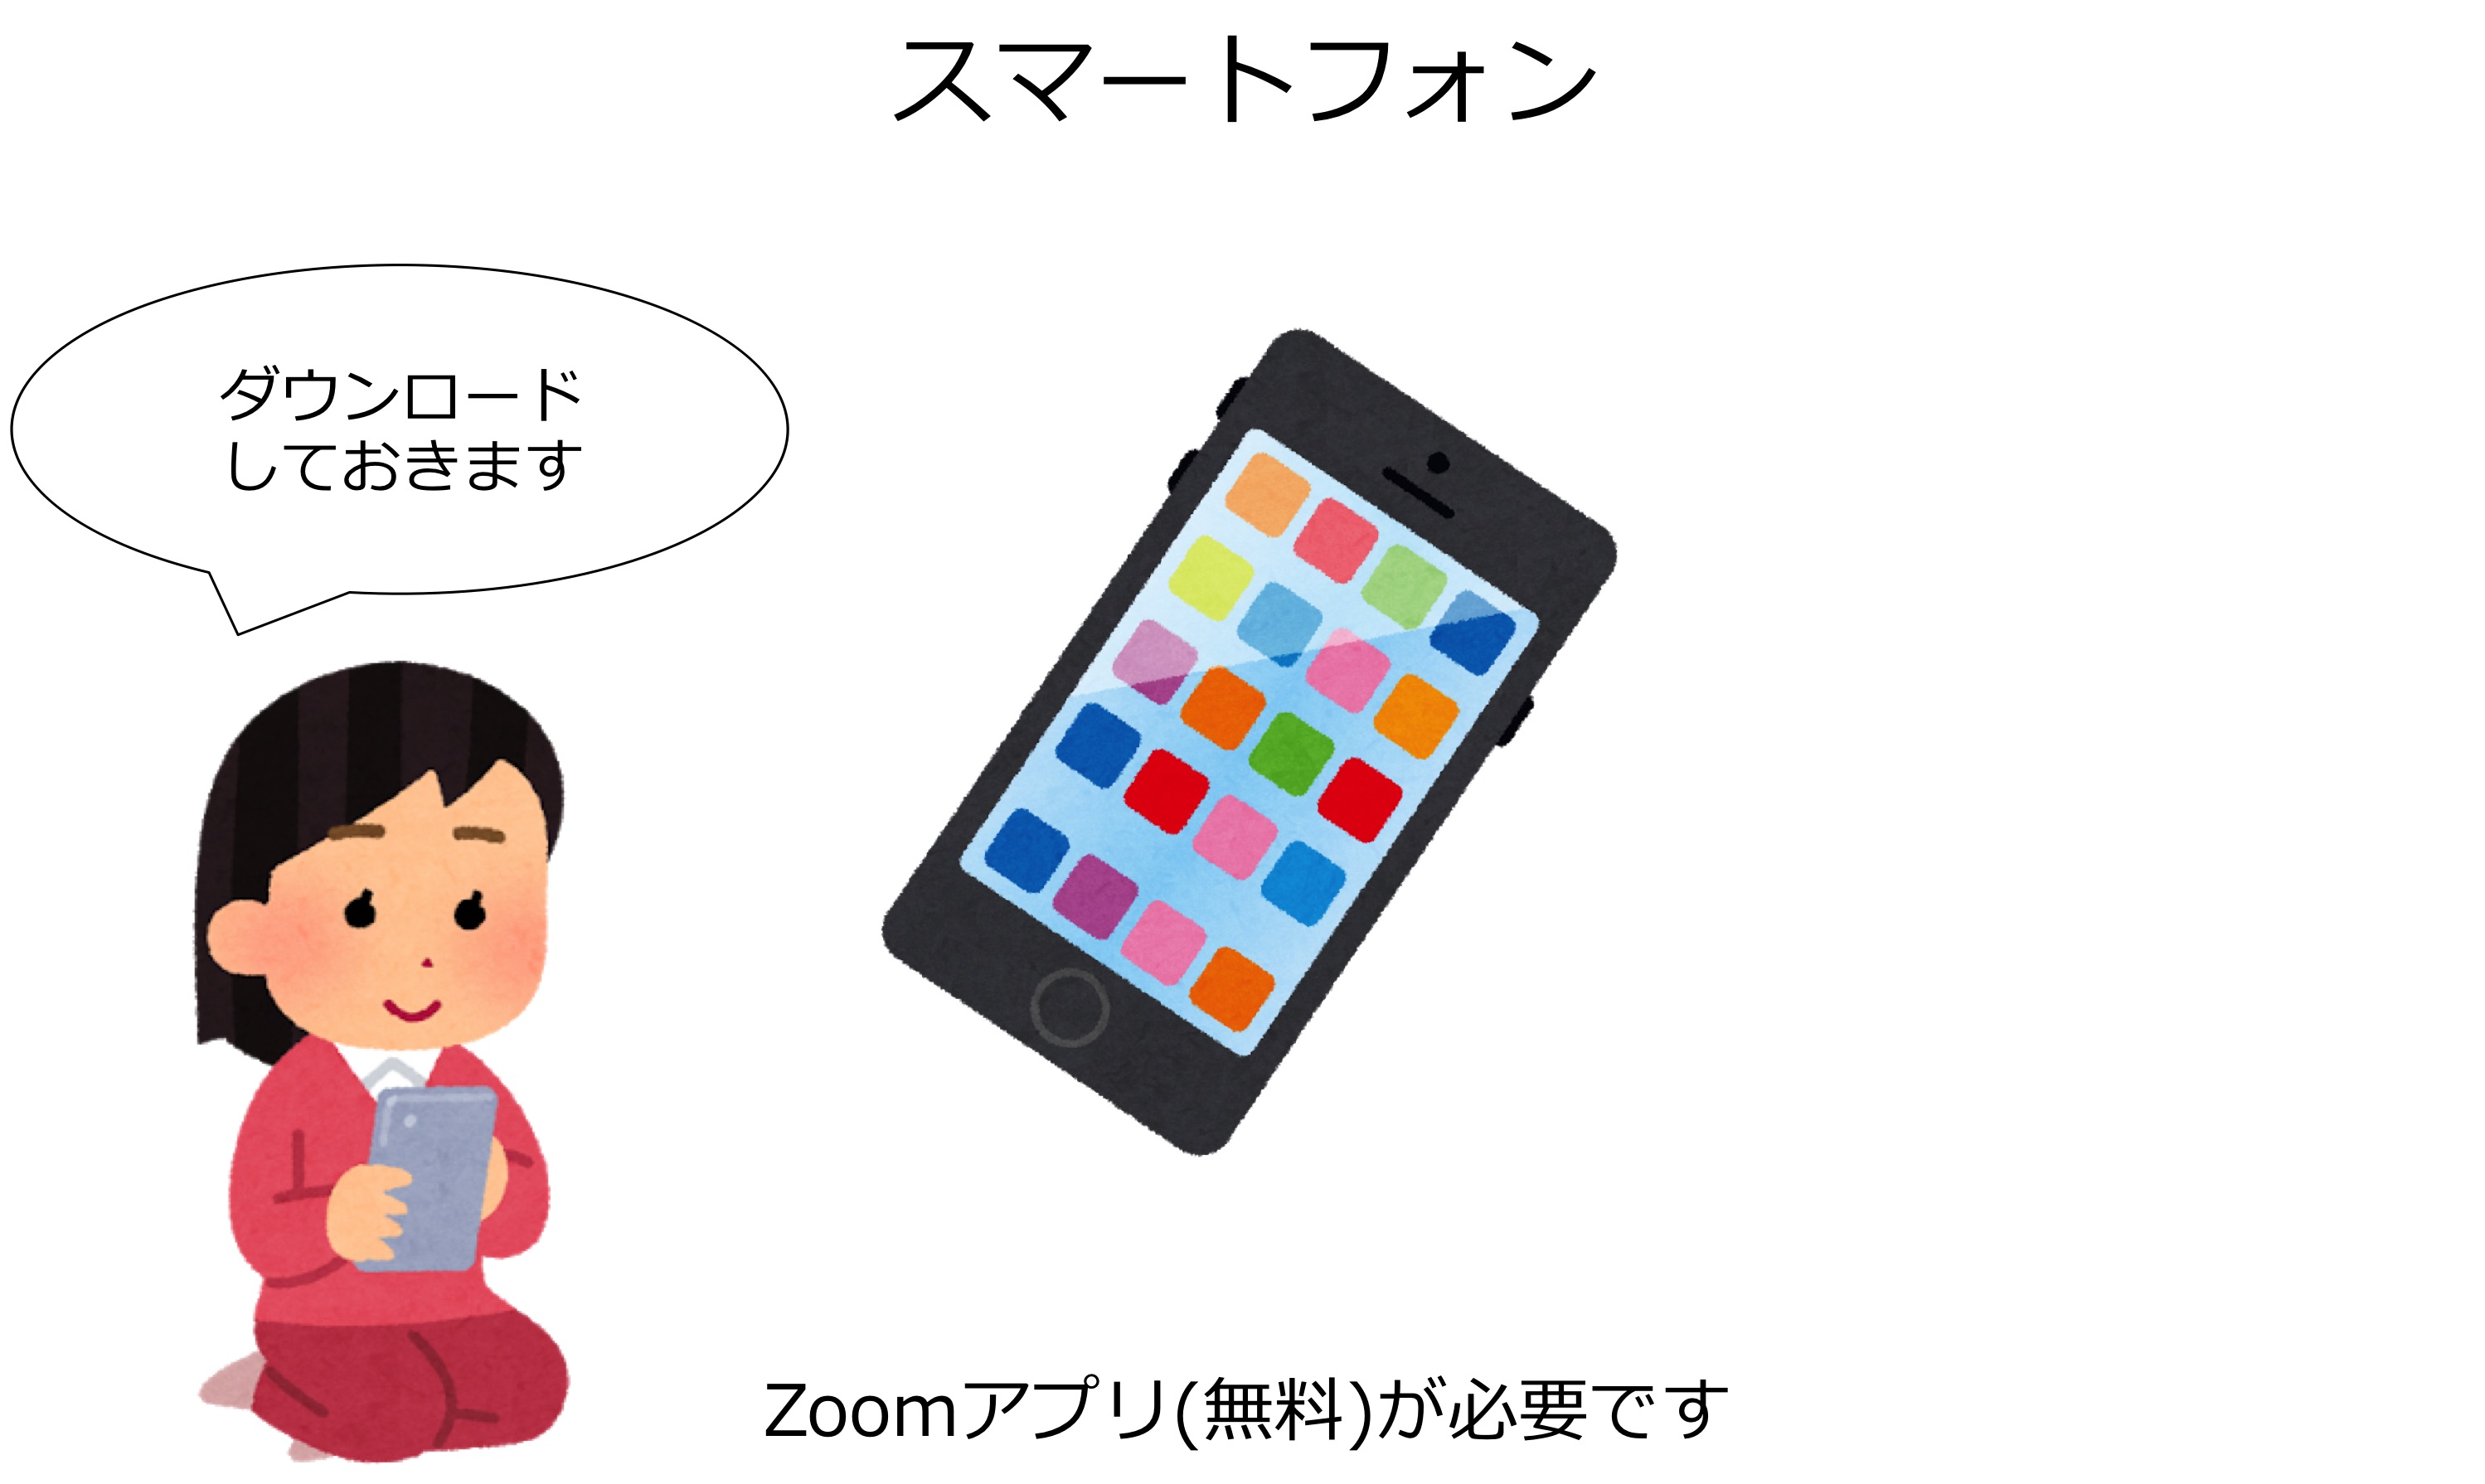 Zoomにスマホ1